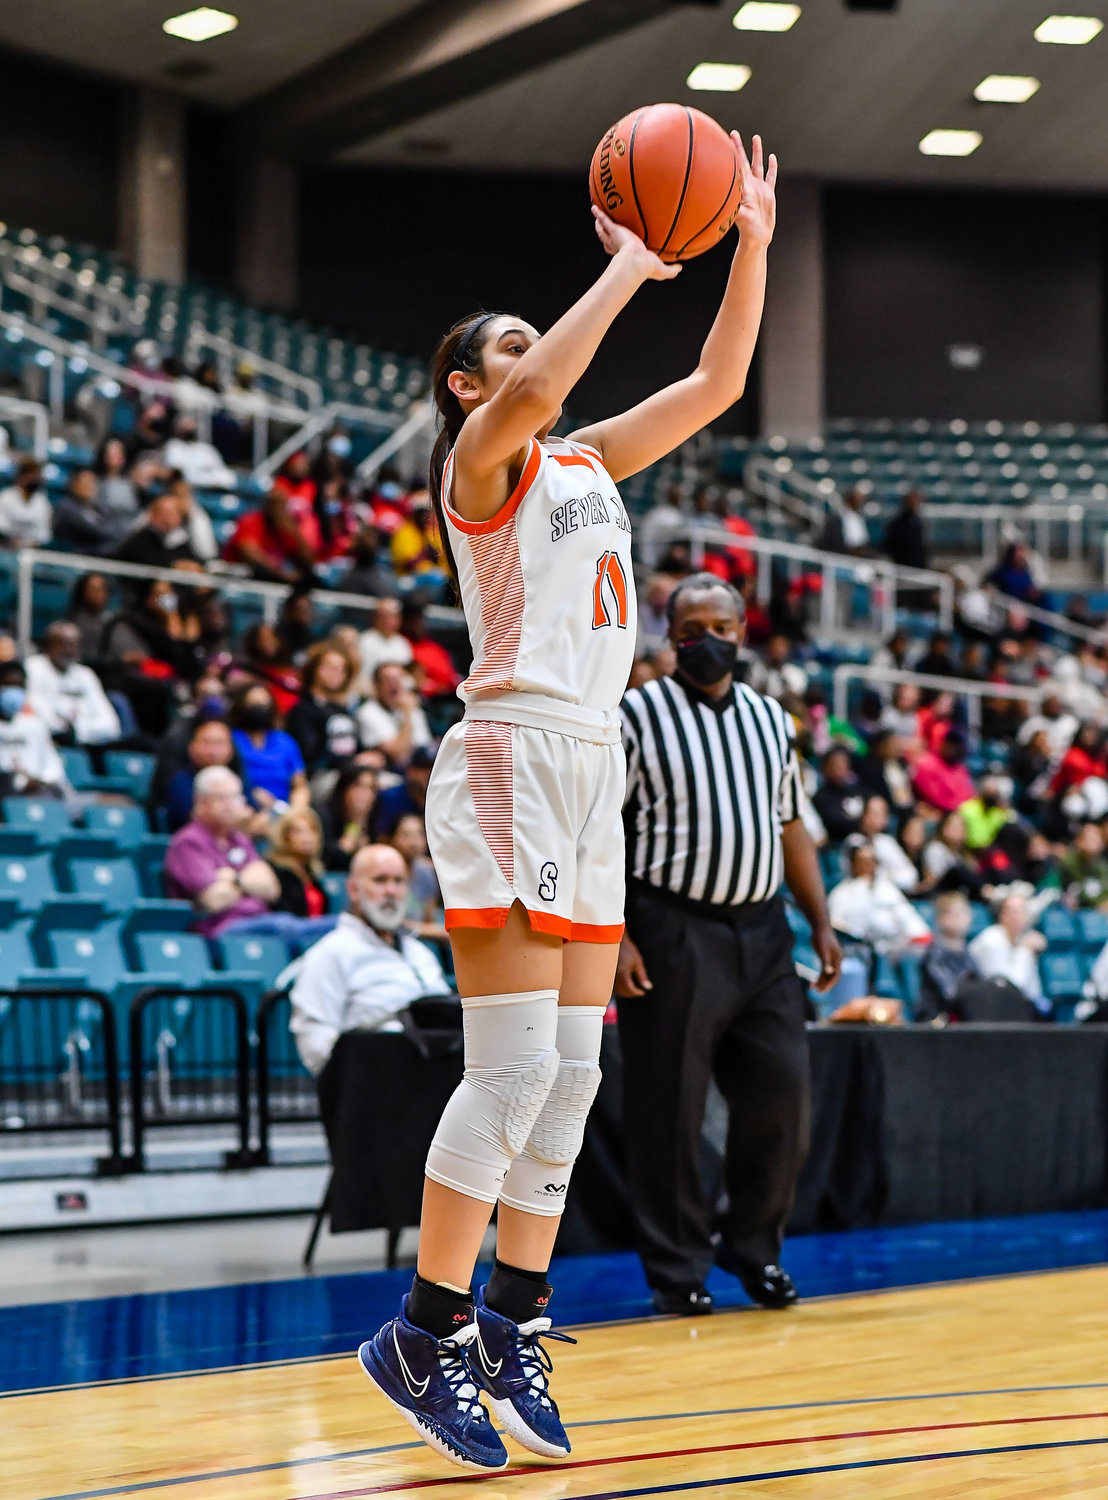 Katy Tx. Feb 22, 2022:  Seven Lakes Caitlyn Quintero #11 goes up for the shot during the Regional Quarterfinal playoff game, Seven Lakes vs Fort Bend Austin at the Merrell Center. (Photo by Mark Goodman / Katy Times)